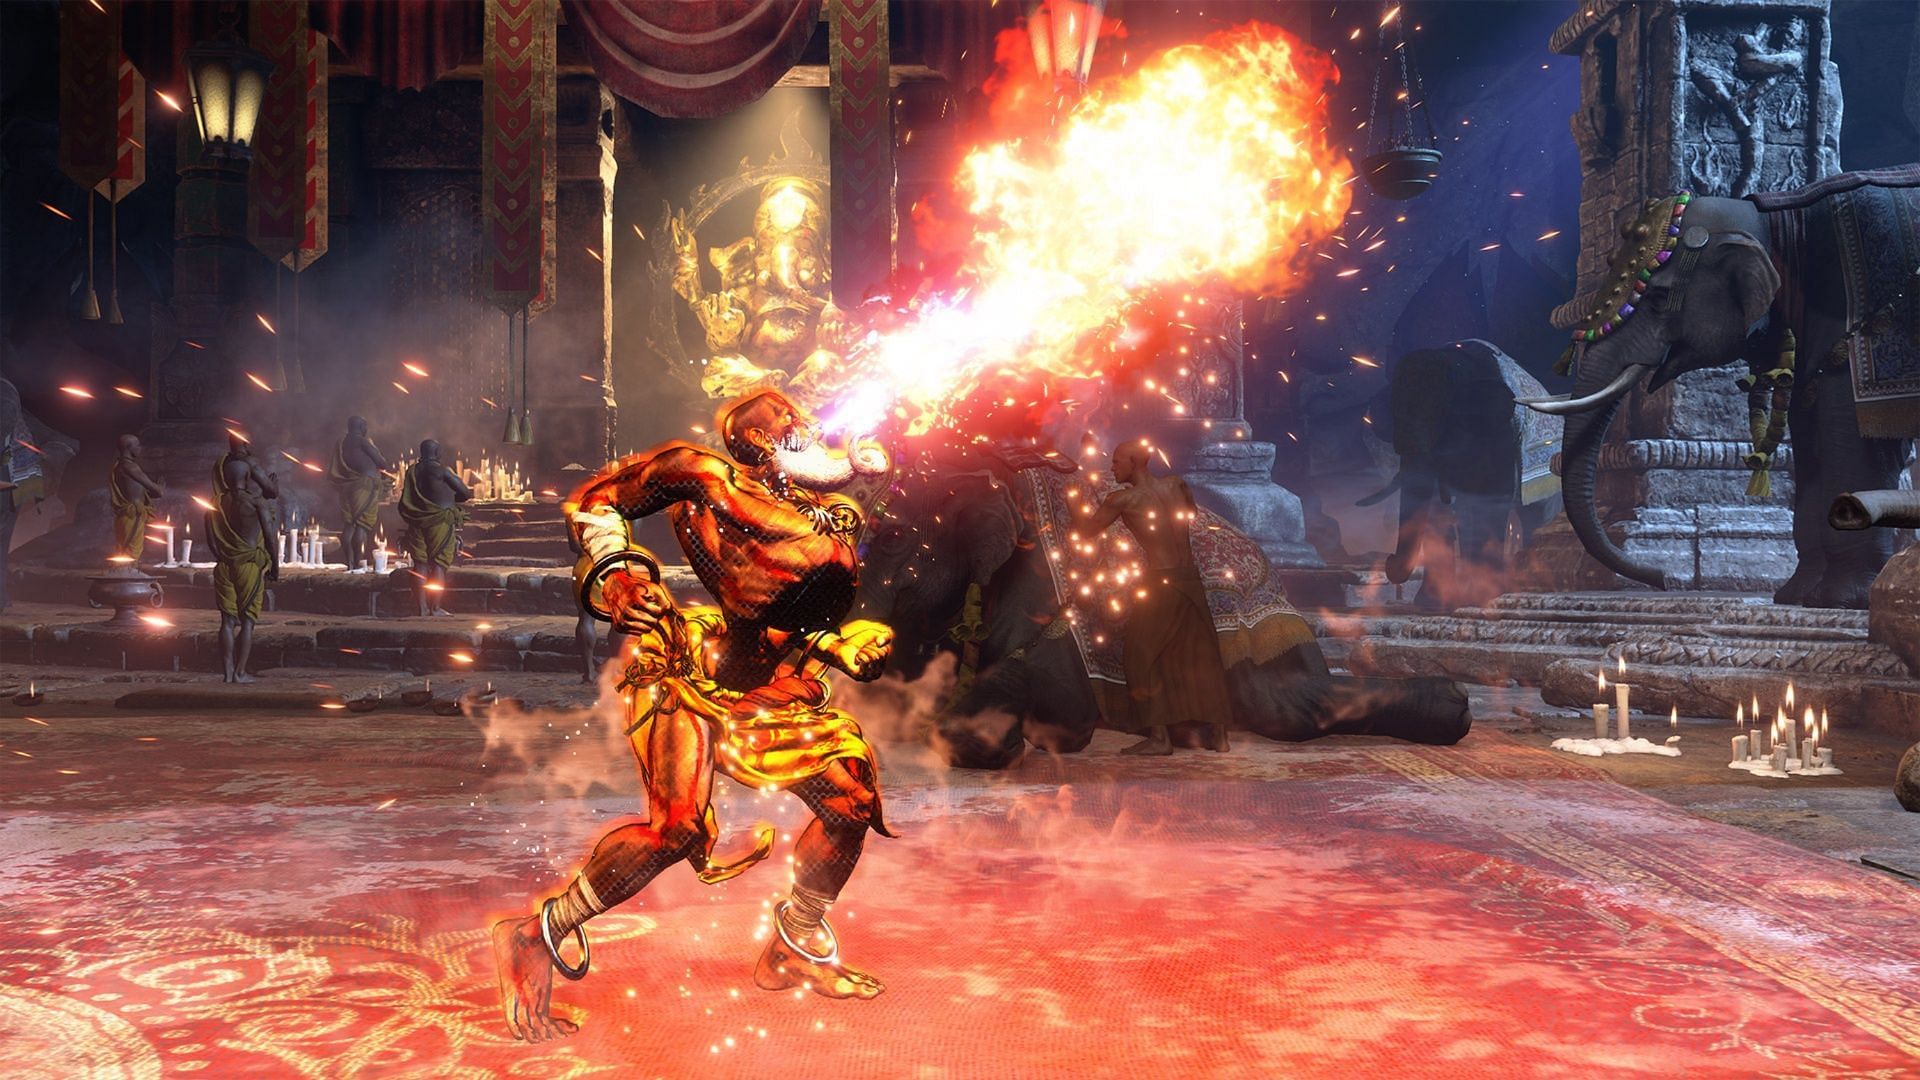 Dhalsim is just as stretchy and fire-breathy as ever.